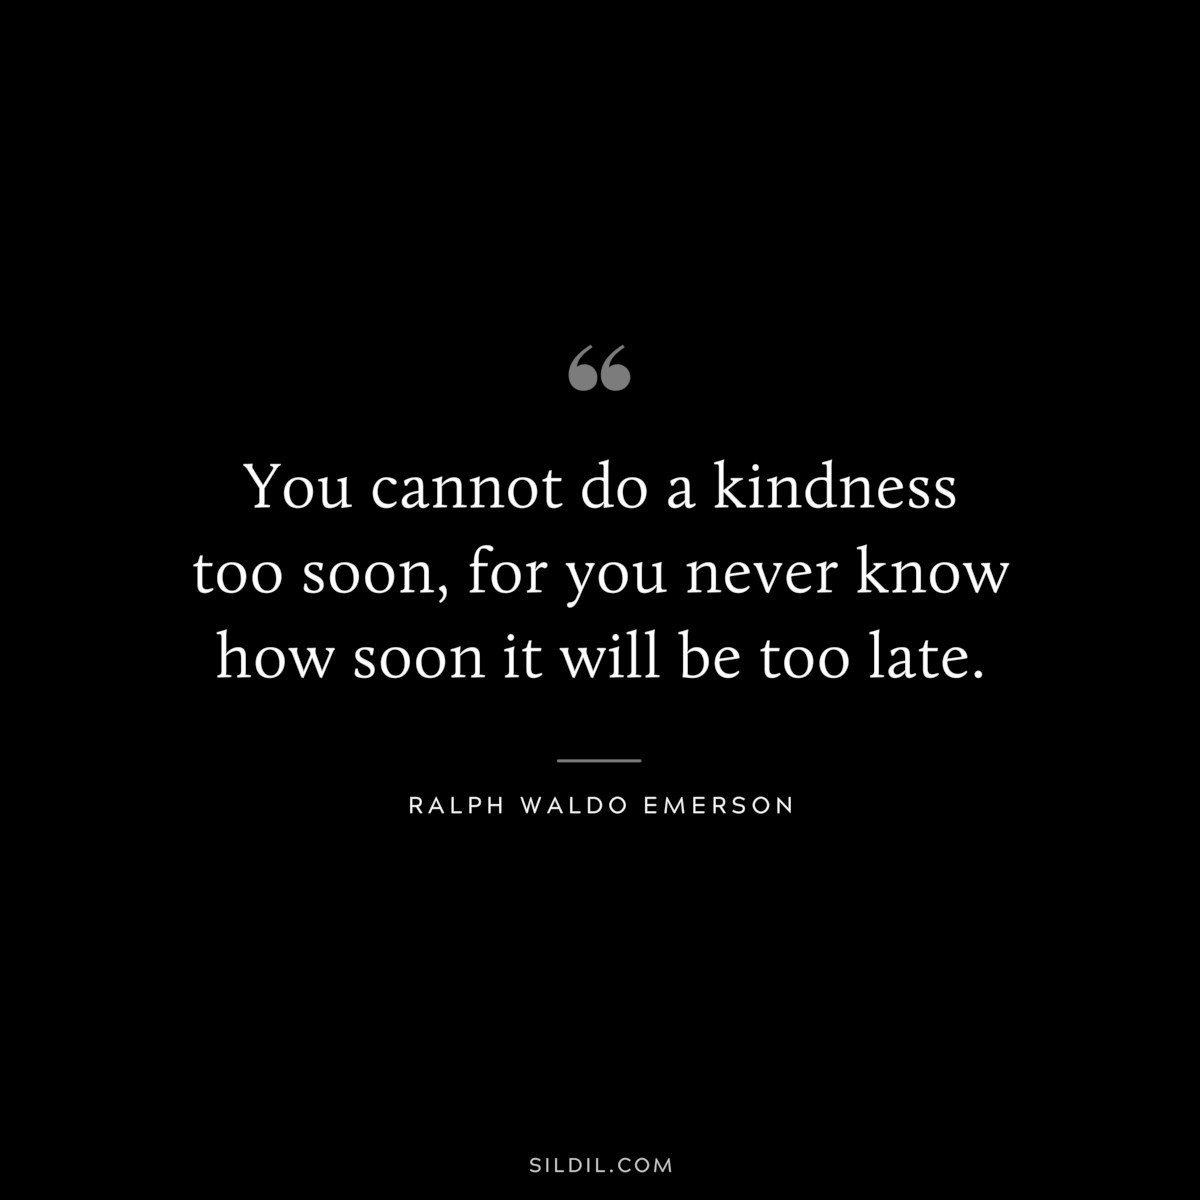 You cannot do a kindness too soon, for you never know how soon it will be too late. — Ralph Waldo Emerson